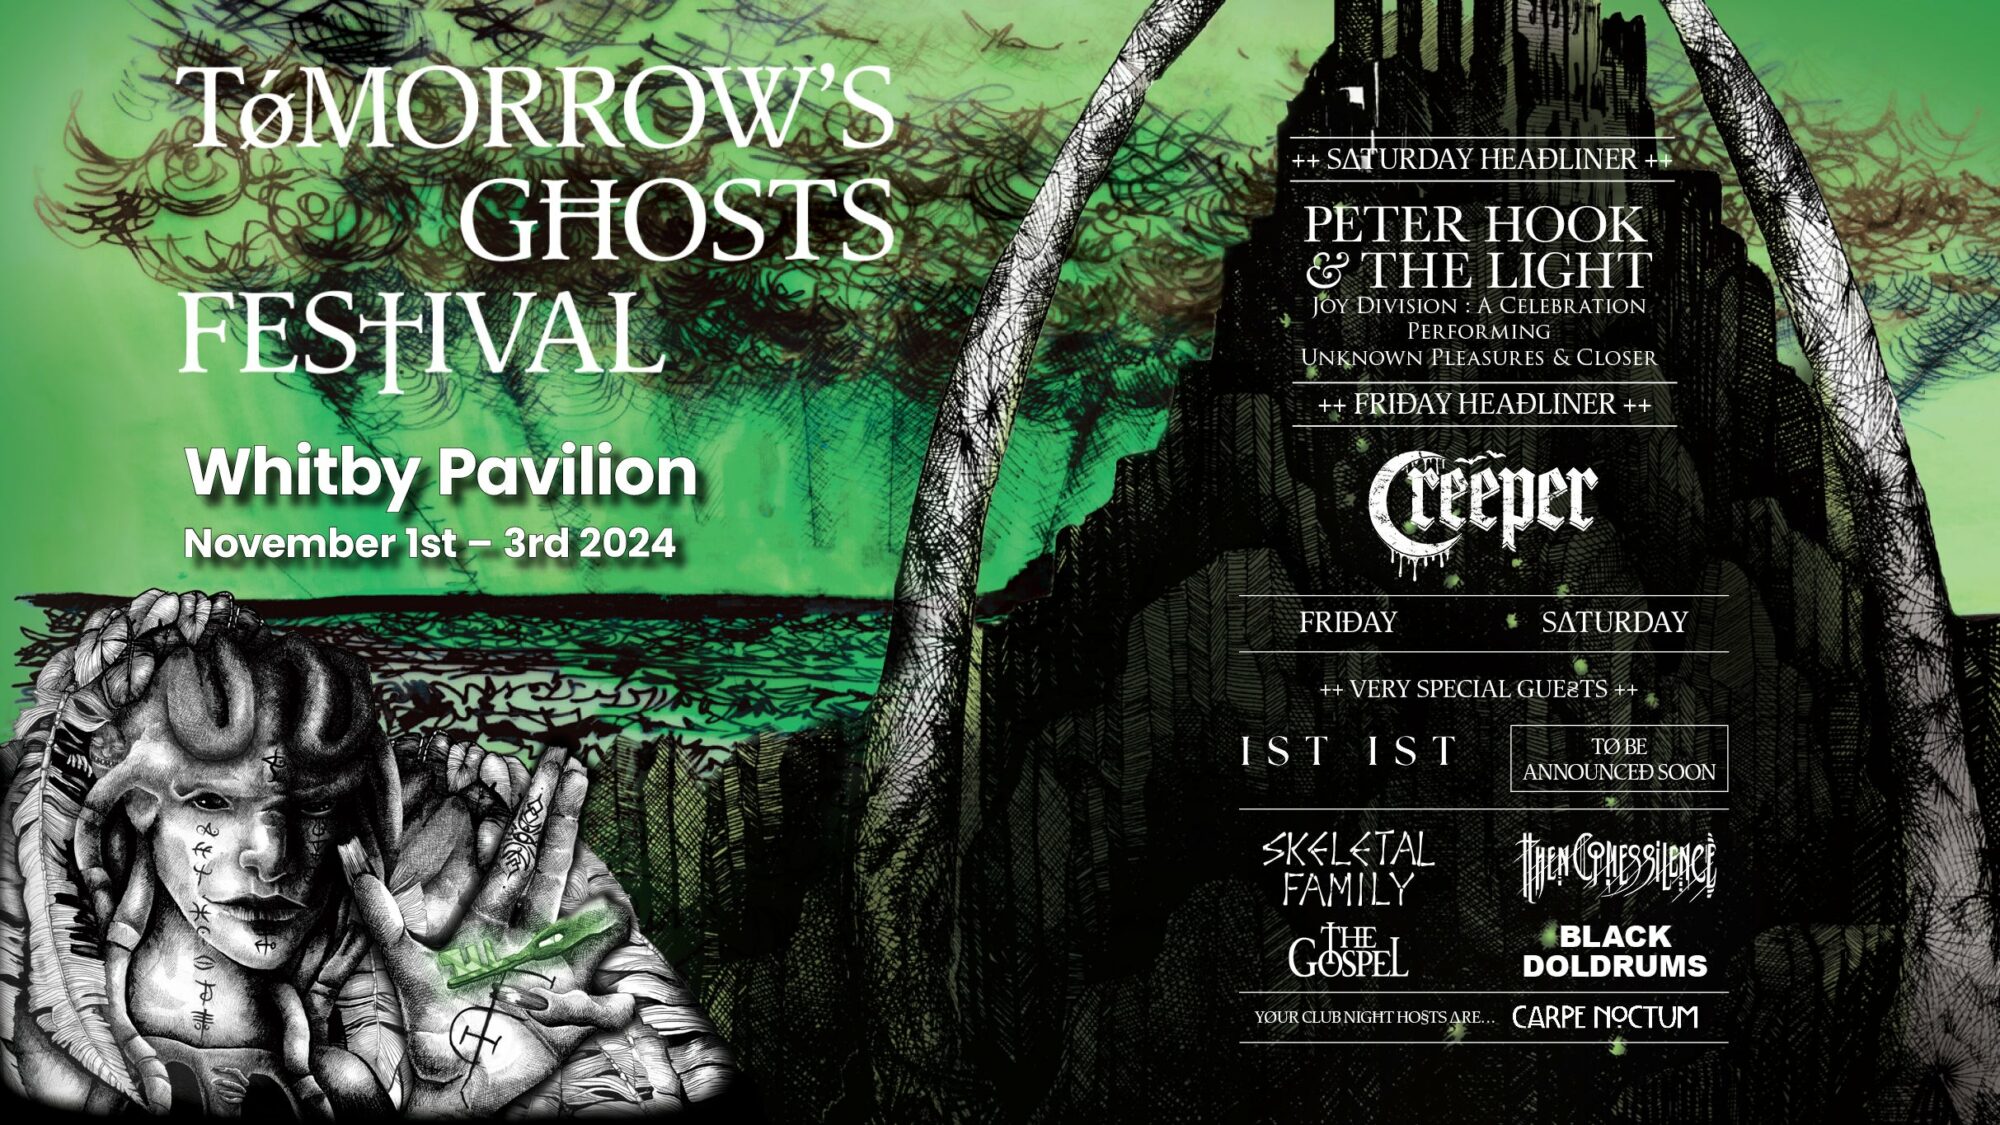 Image name Tomorrows Ghosts Festival Friday Night Ticket at Whitby Pavilion Northern Lights Suite Whitby the 17 image from the post Tomorrows Ghosts Festival Saturday Night Ticket at Whitby Pavilion Northern Lights Suite, Whitby in Yorkshire.com.